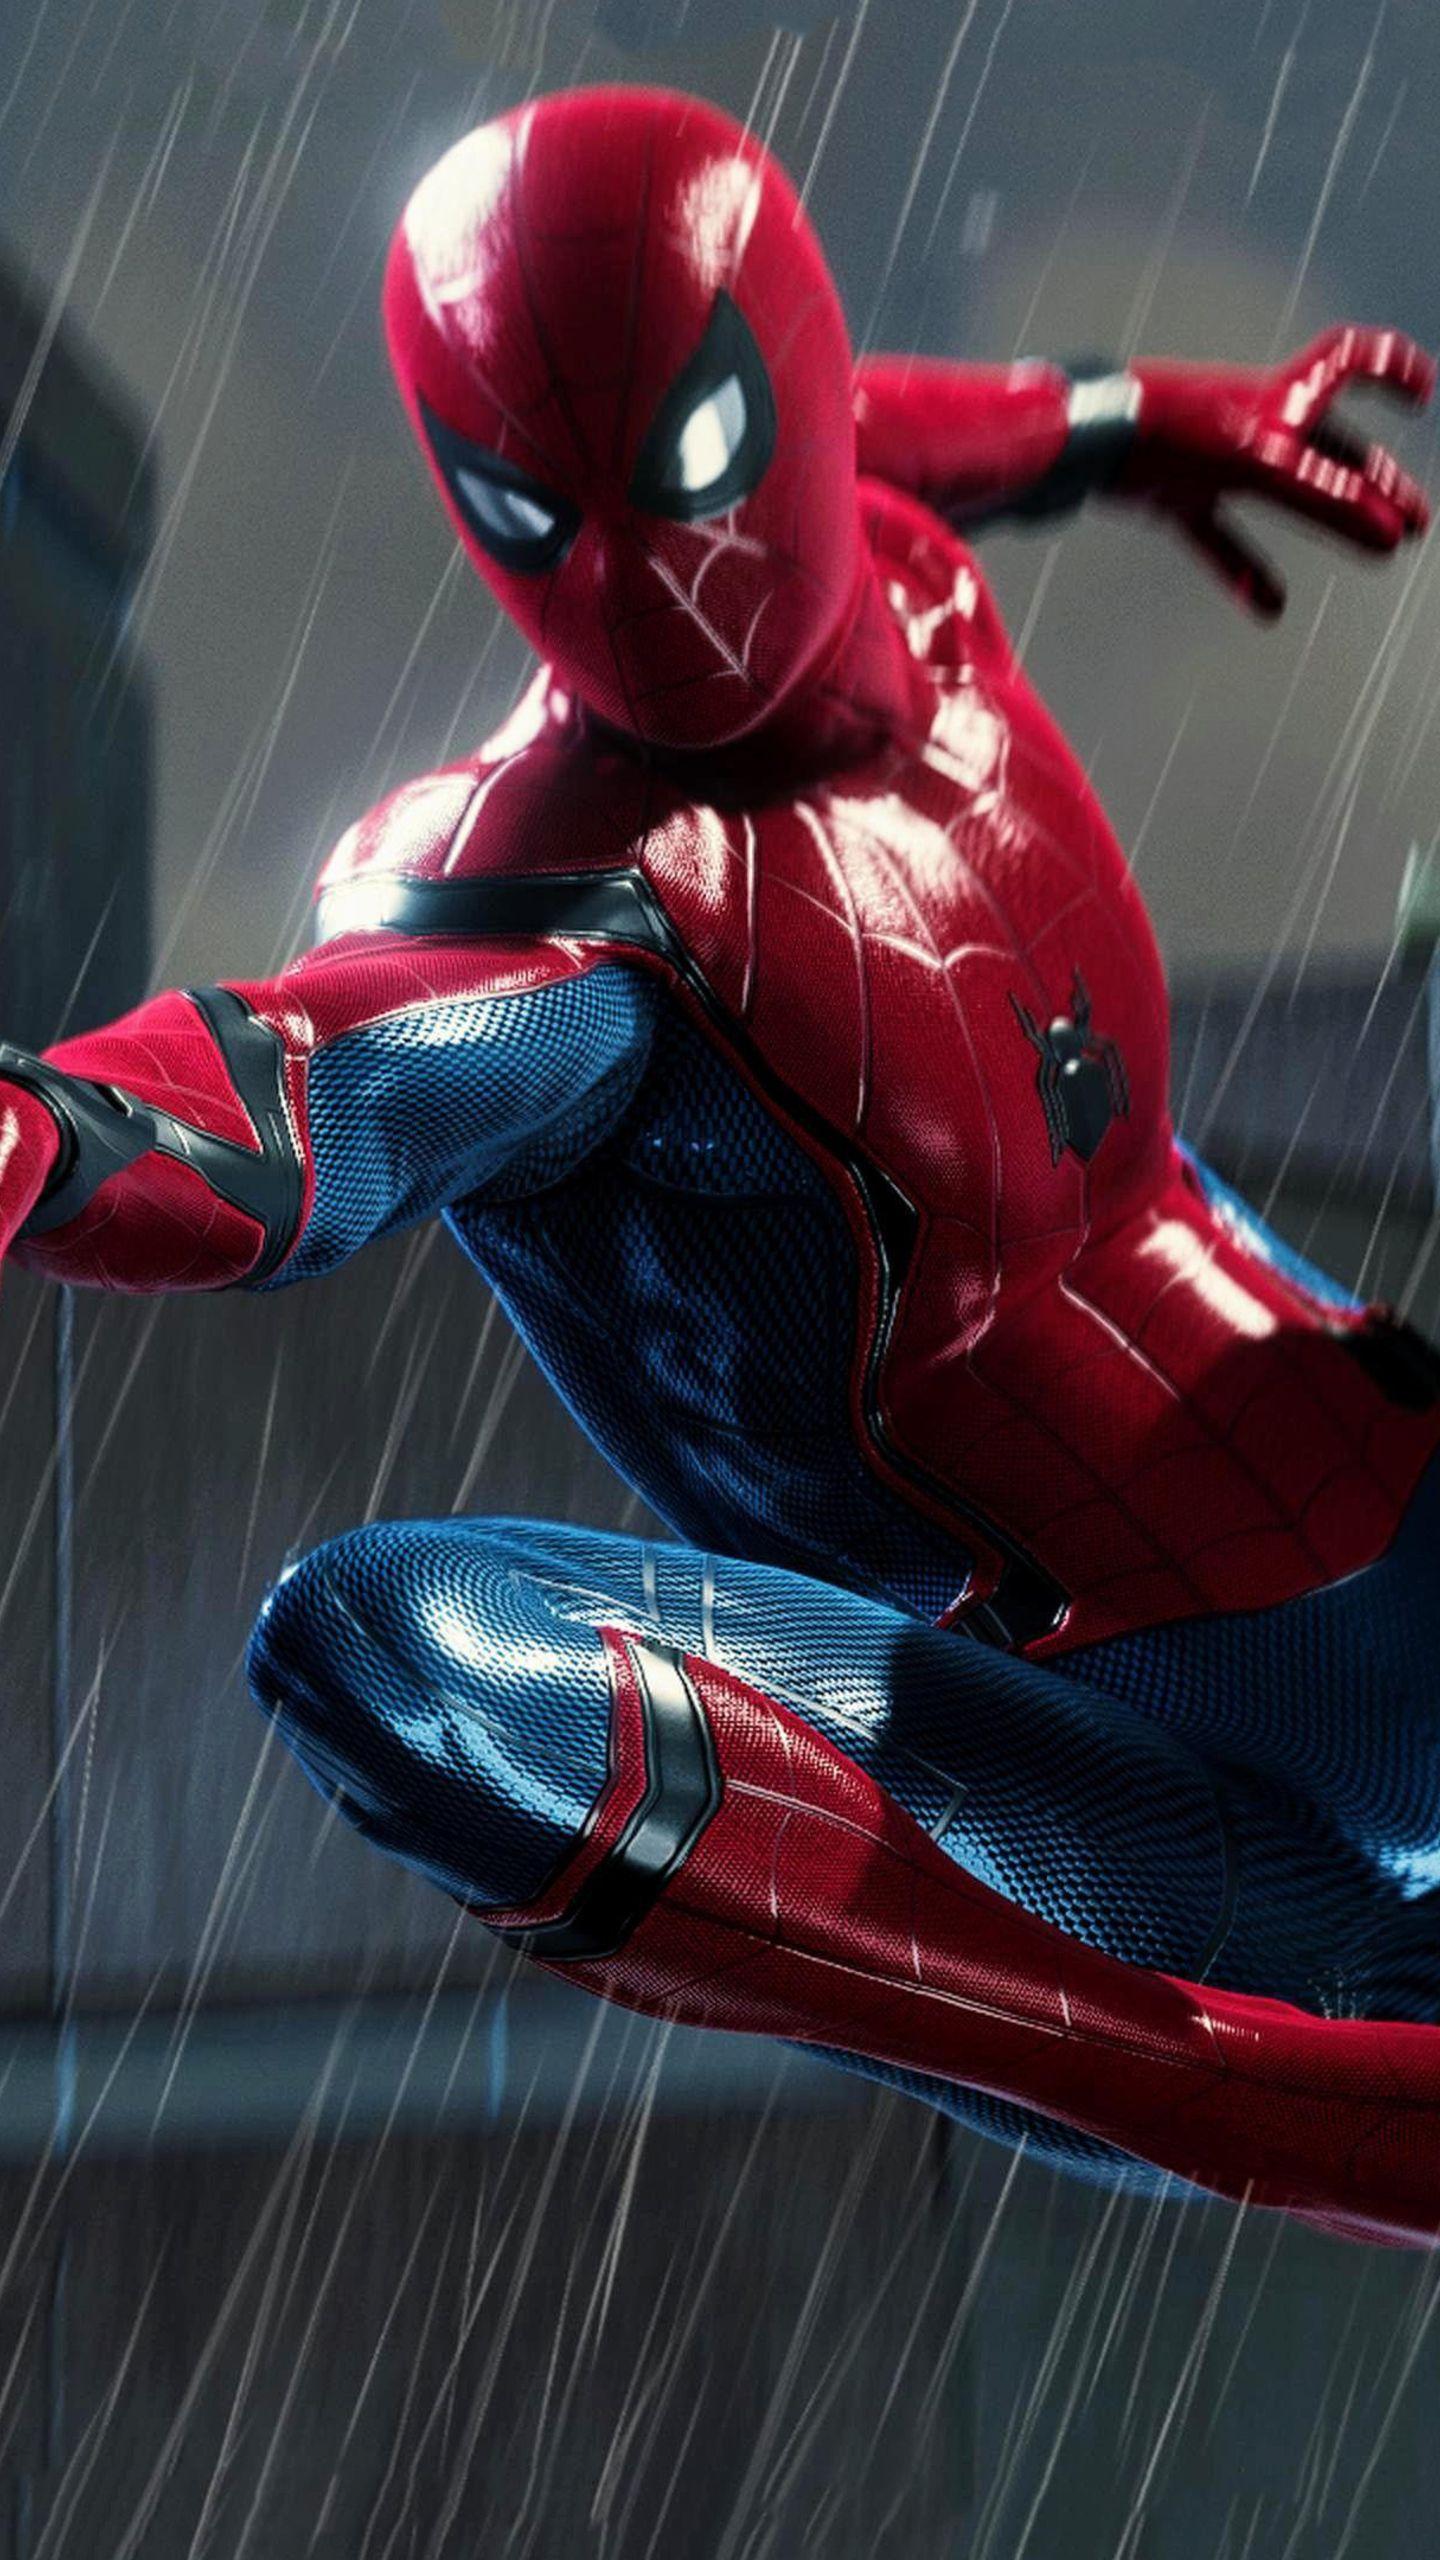 TOP 10 MOST FAMOUS AND POPULAR SUPERHEROES. MARVEL & DC #spiderman